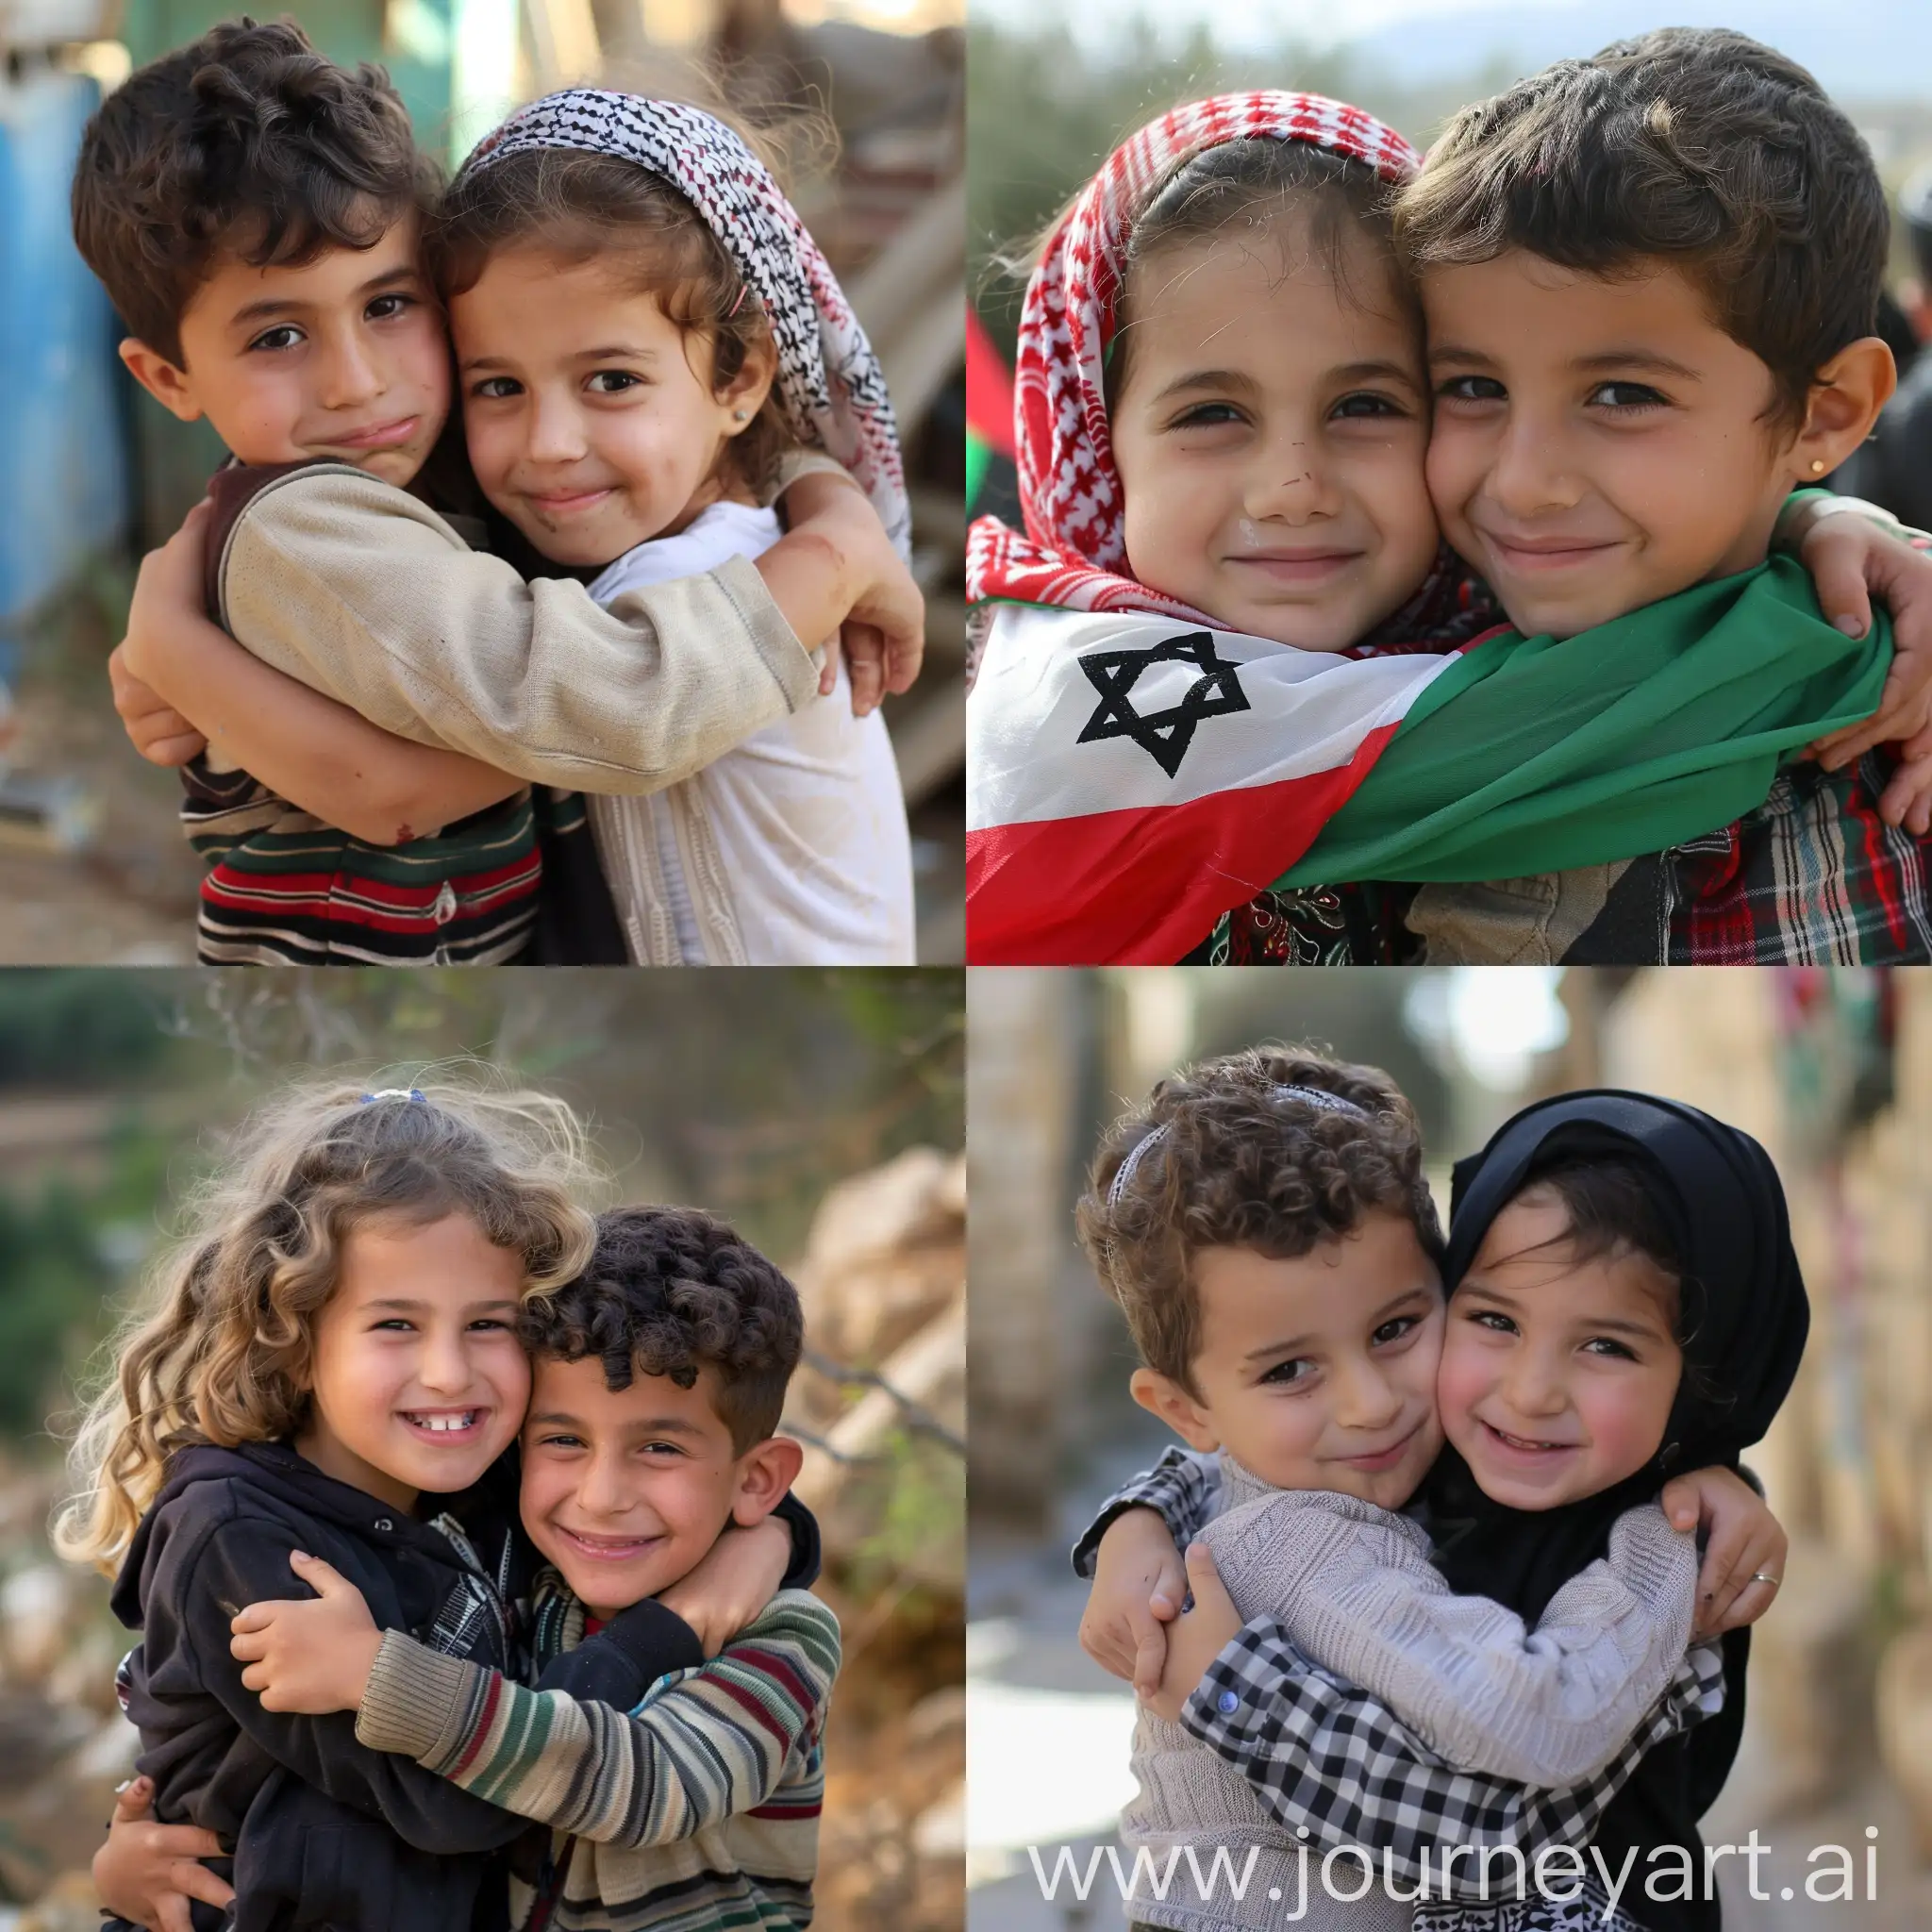 Palestinian-and-Israeli-Children-Embrace-Friendship-in-Harmony